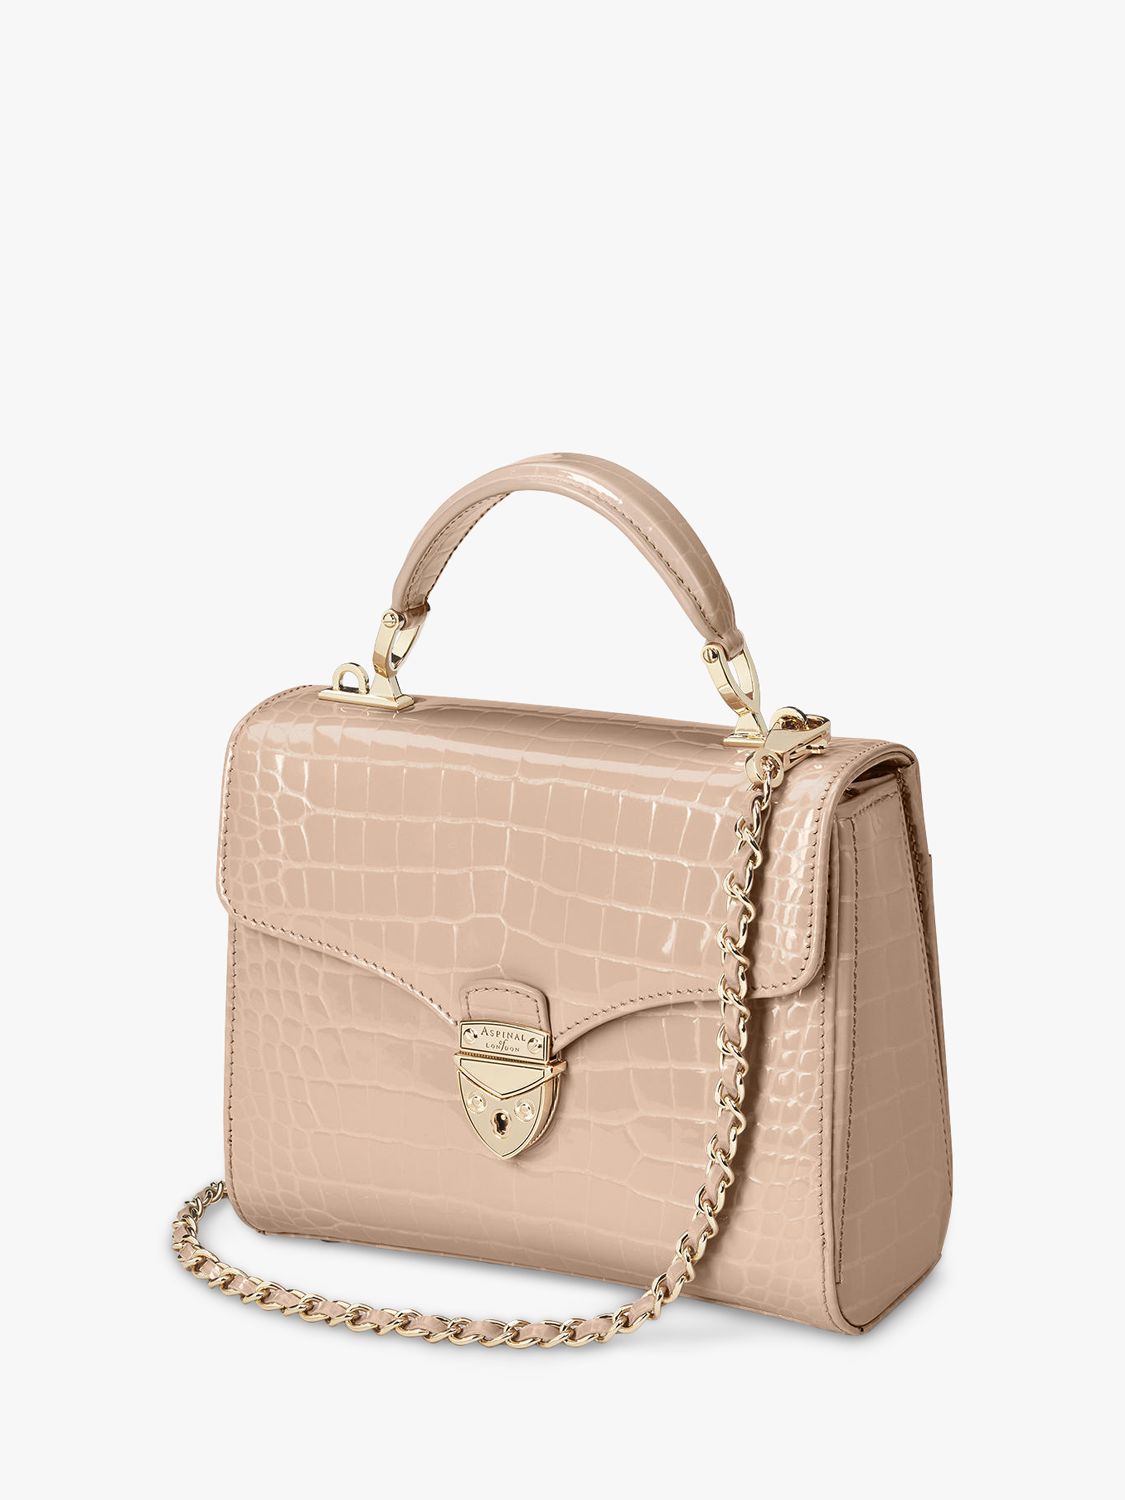 Aspinal of London Midi Mayfair Croc Effect Leather Cross Body Bag, Taupe